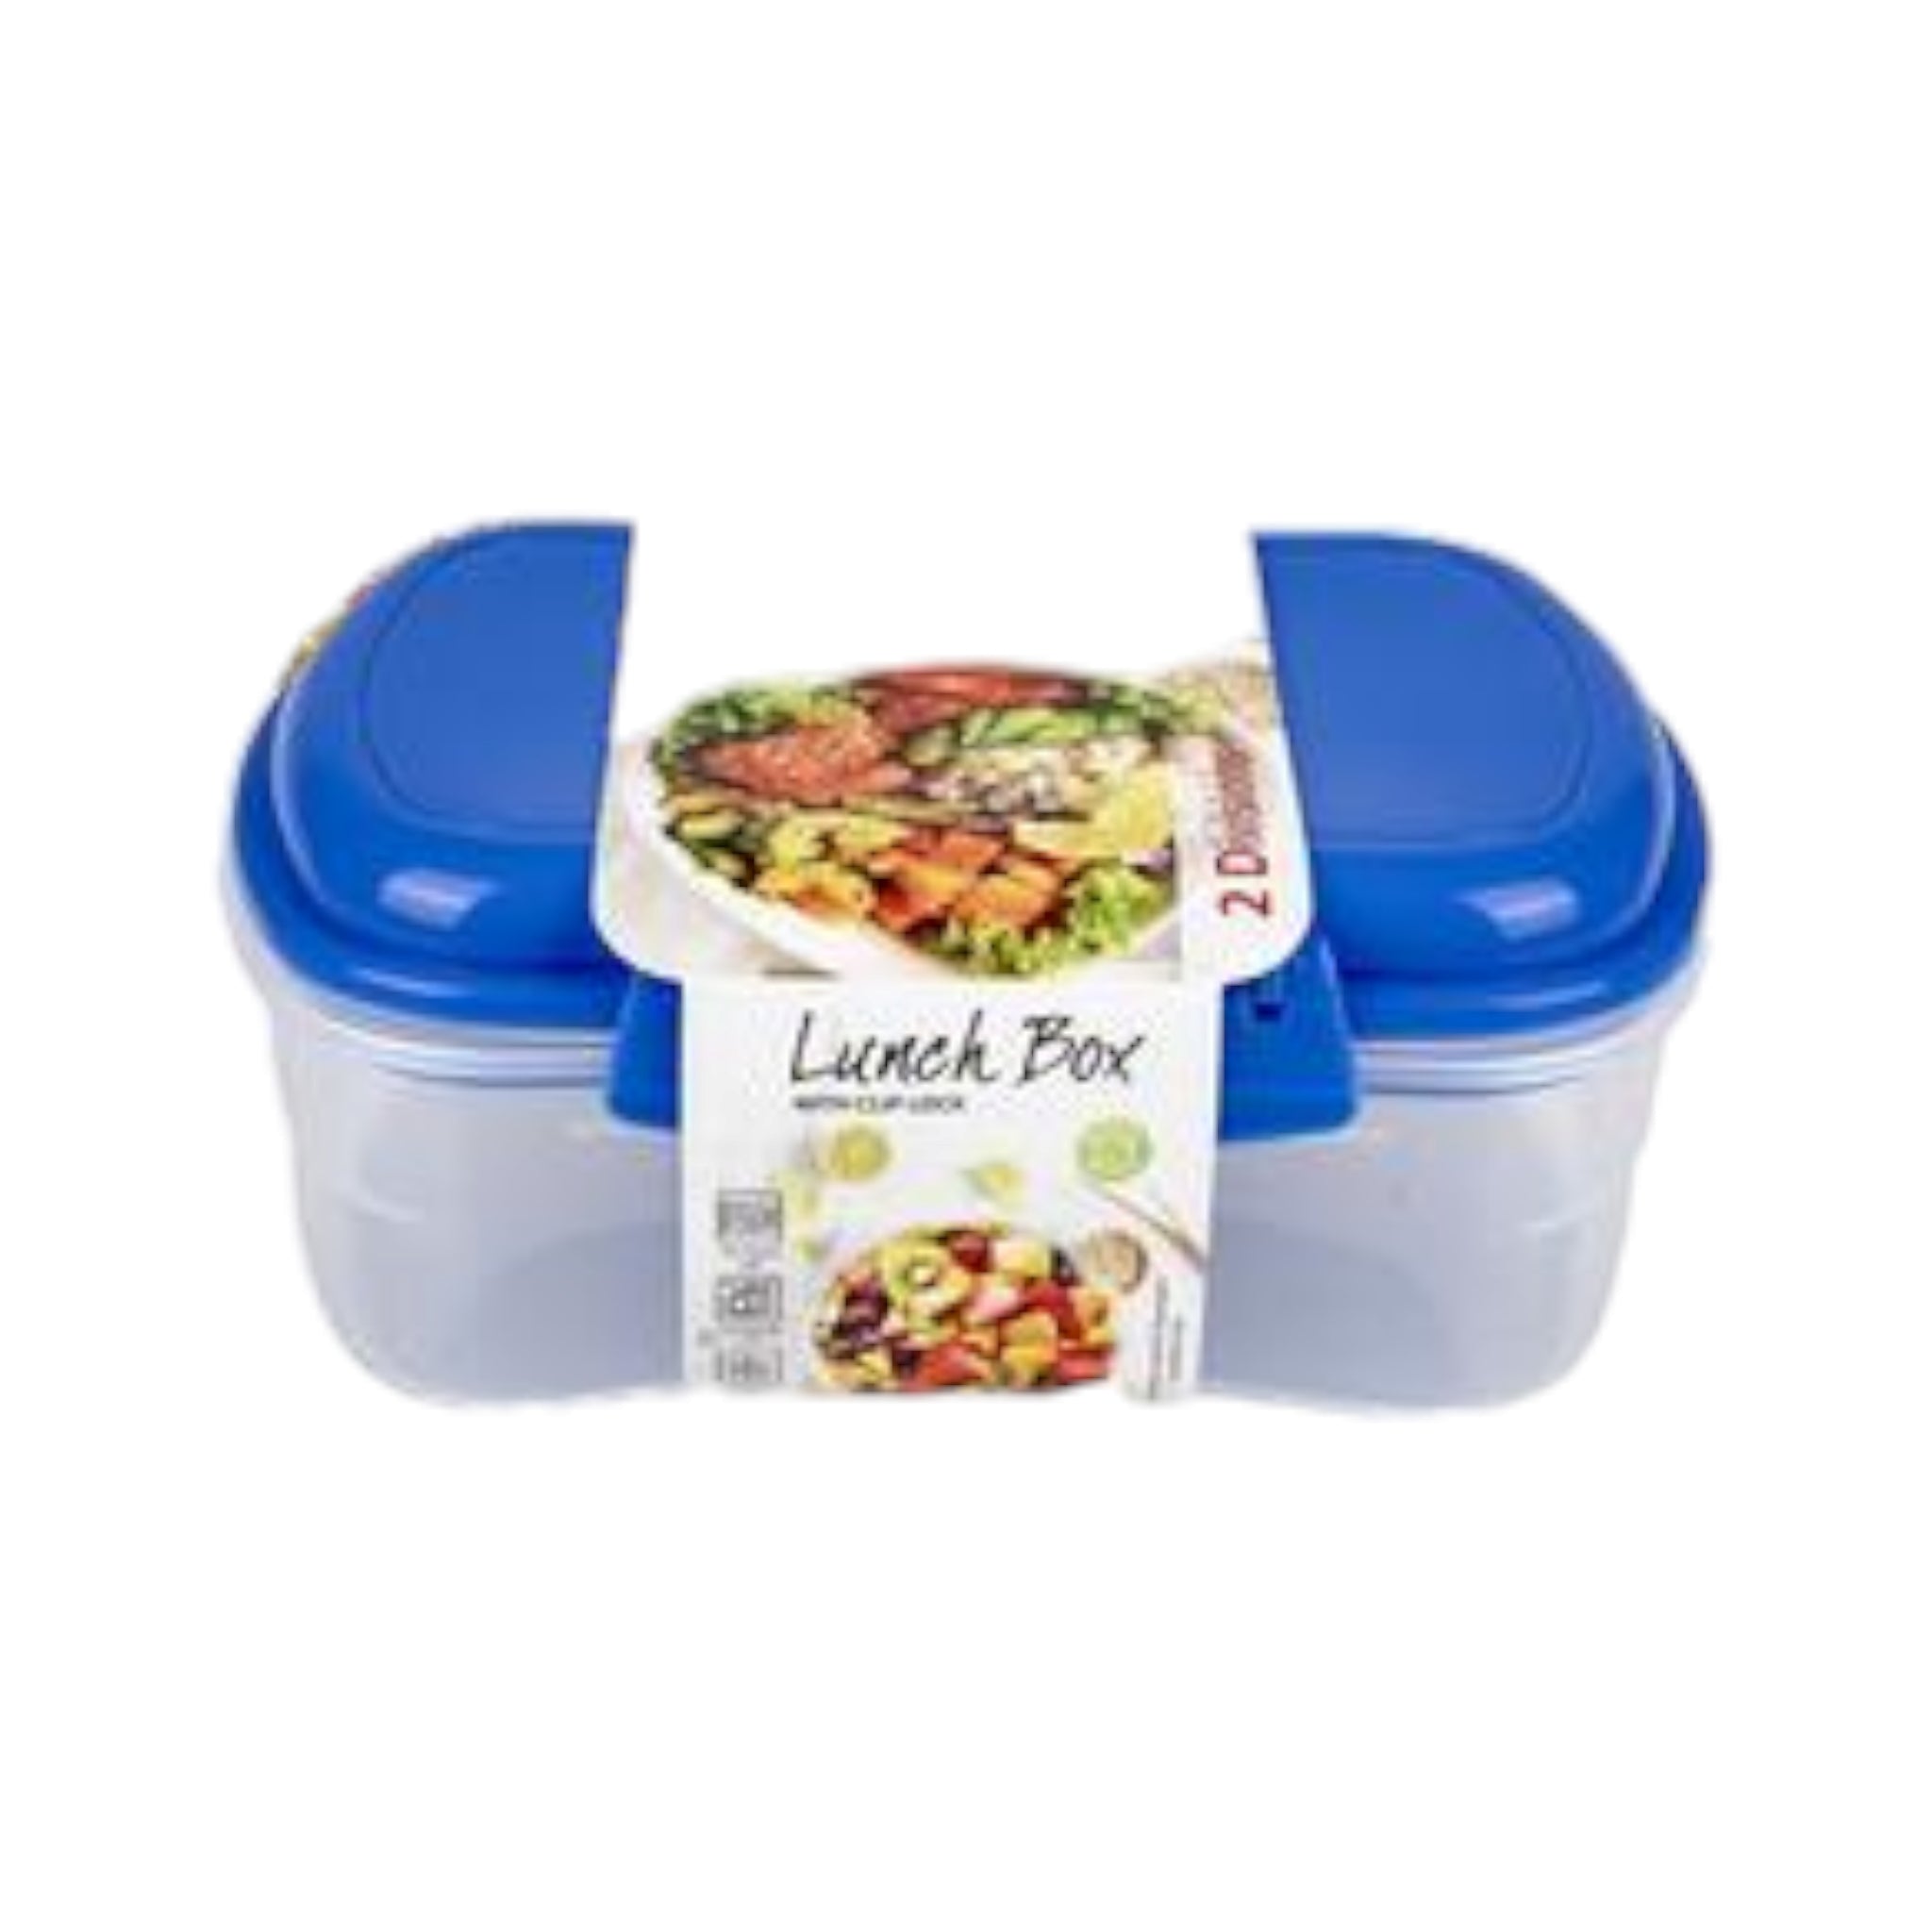 Lunch Box 2-Division with Clip Lock Lid 712ml